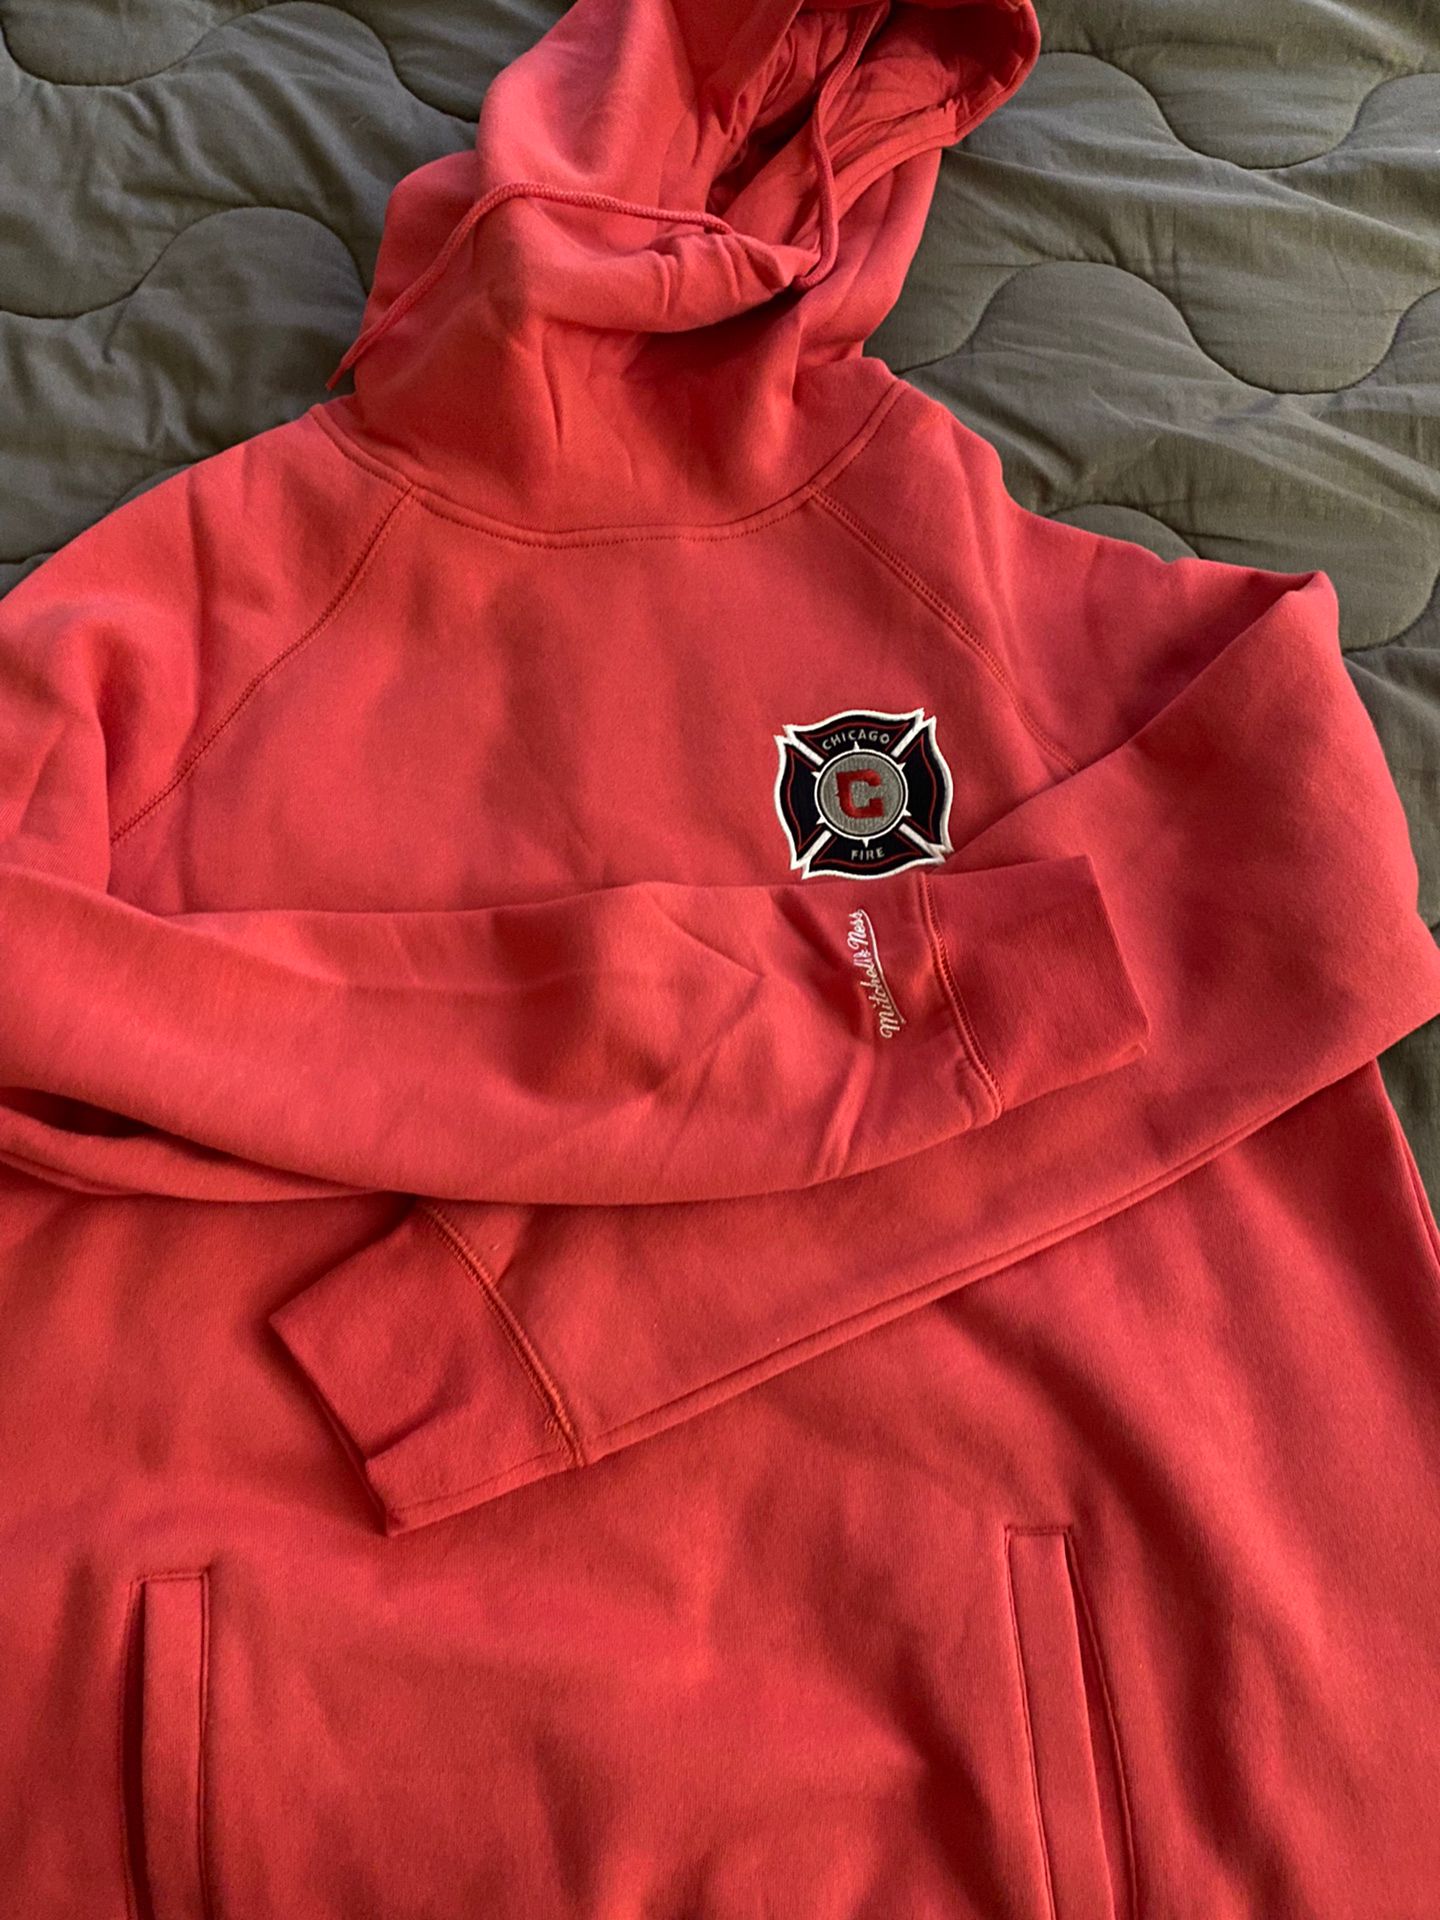 Chicago Fire Mitchell And Ness Adidas Hoodie Sweater 